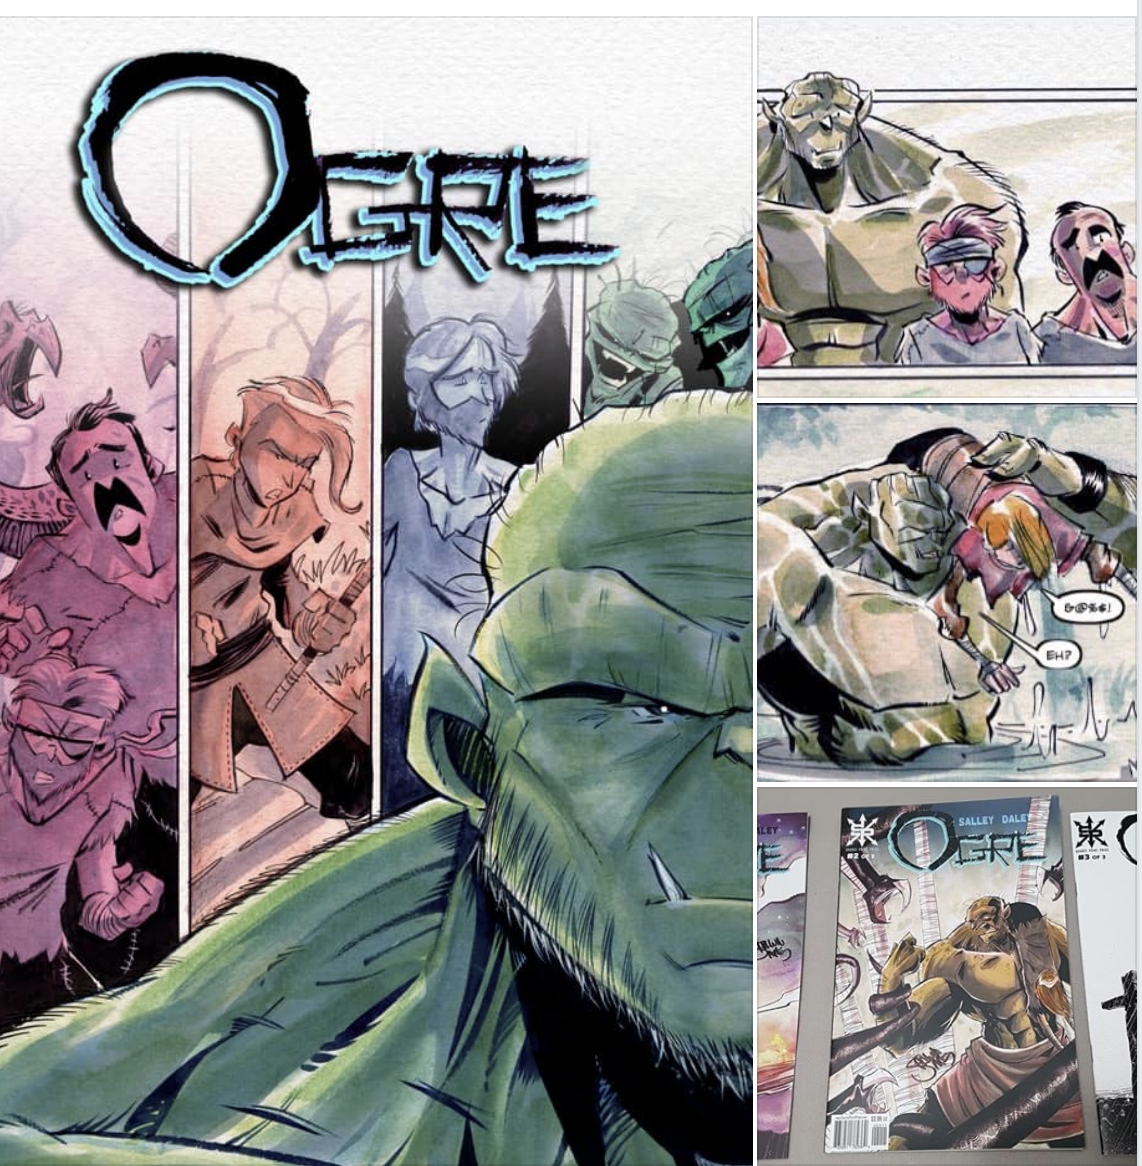 Pre-order the OGRE complete 3 Issue mini-series in Trade Paperback